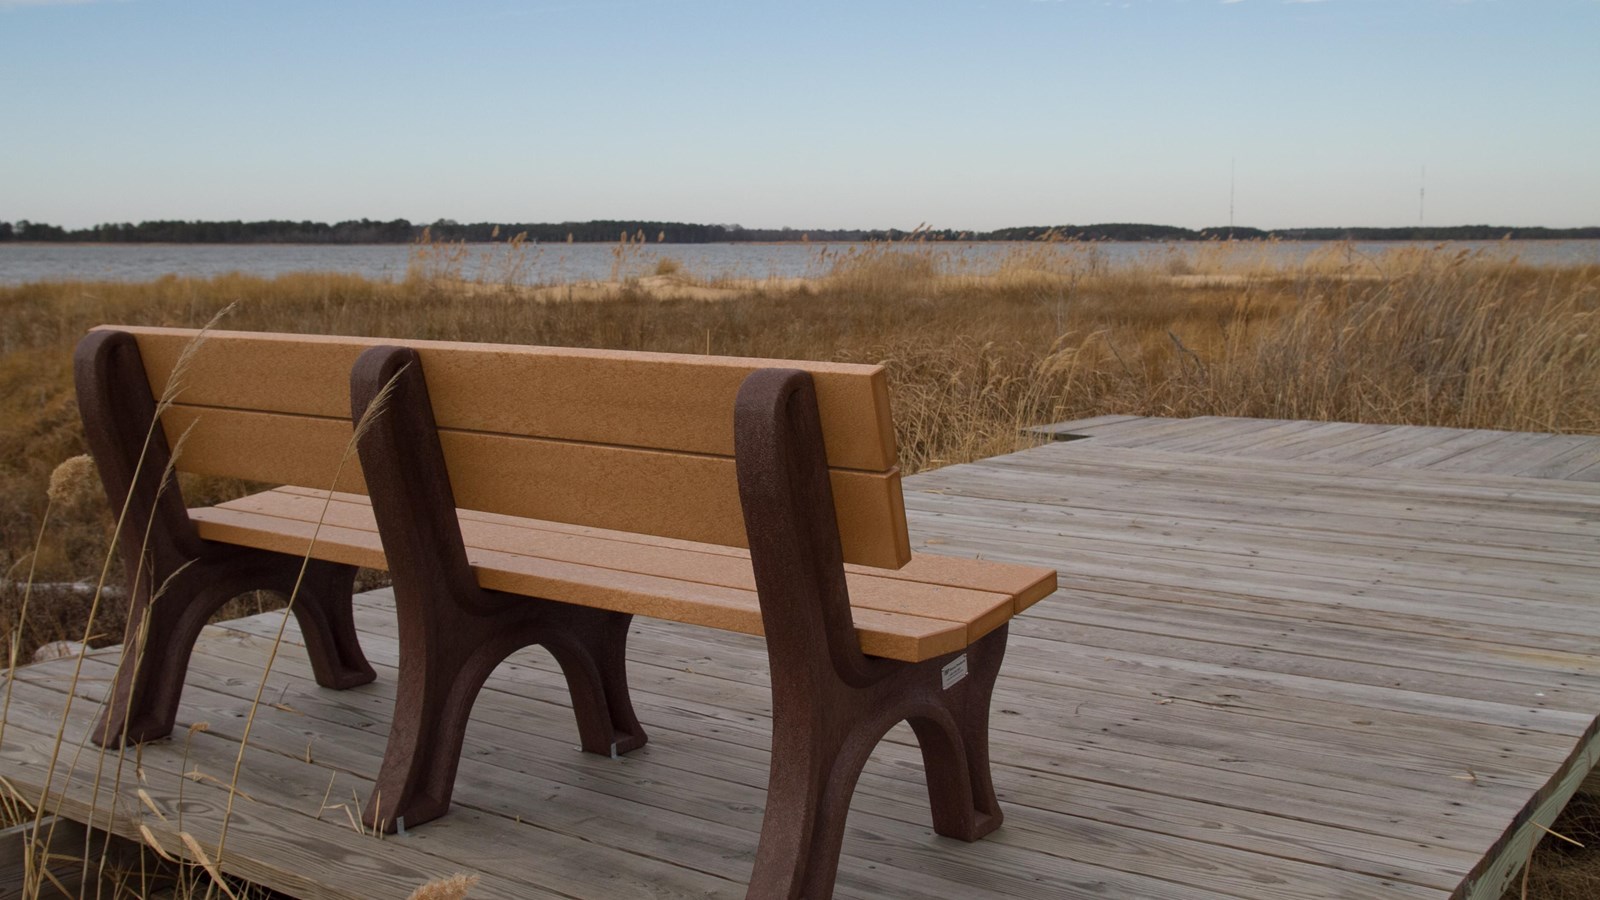 Bench on a raised wooden platform overlooking browned marshland in winter